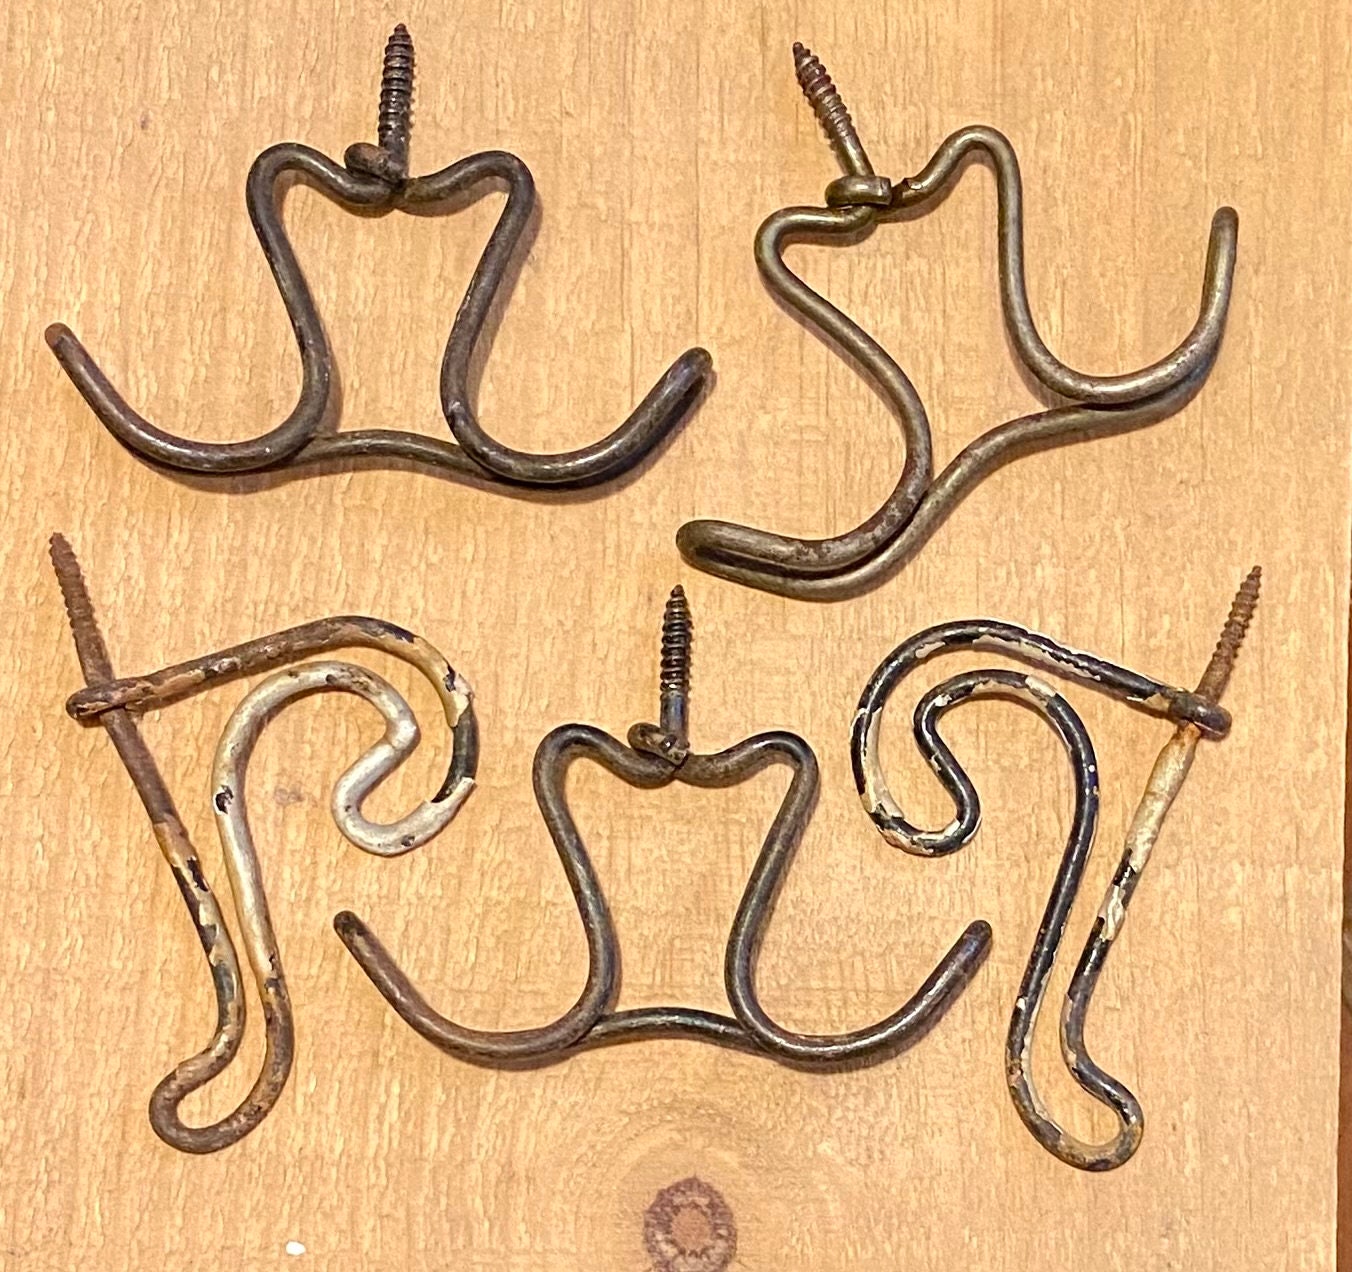 Lot of 5 wire coat hooks. Old and crusty and good. Vintage rustic hardware.  Chippy black paint. Restoration hardware, make a coat rack ?